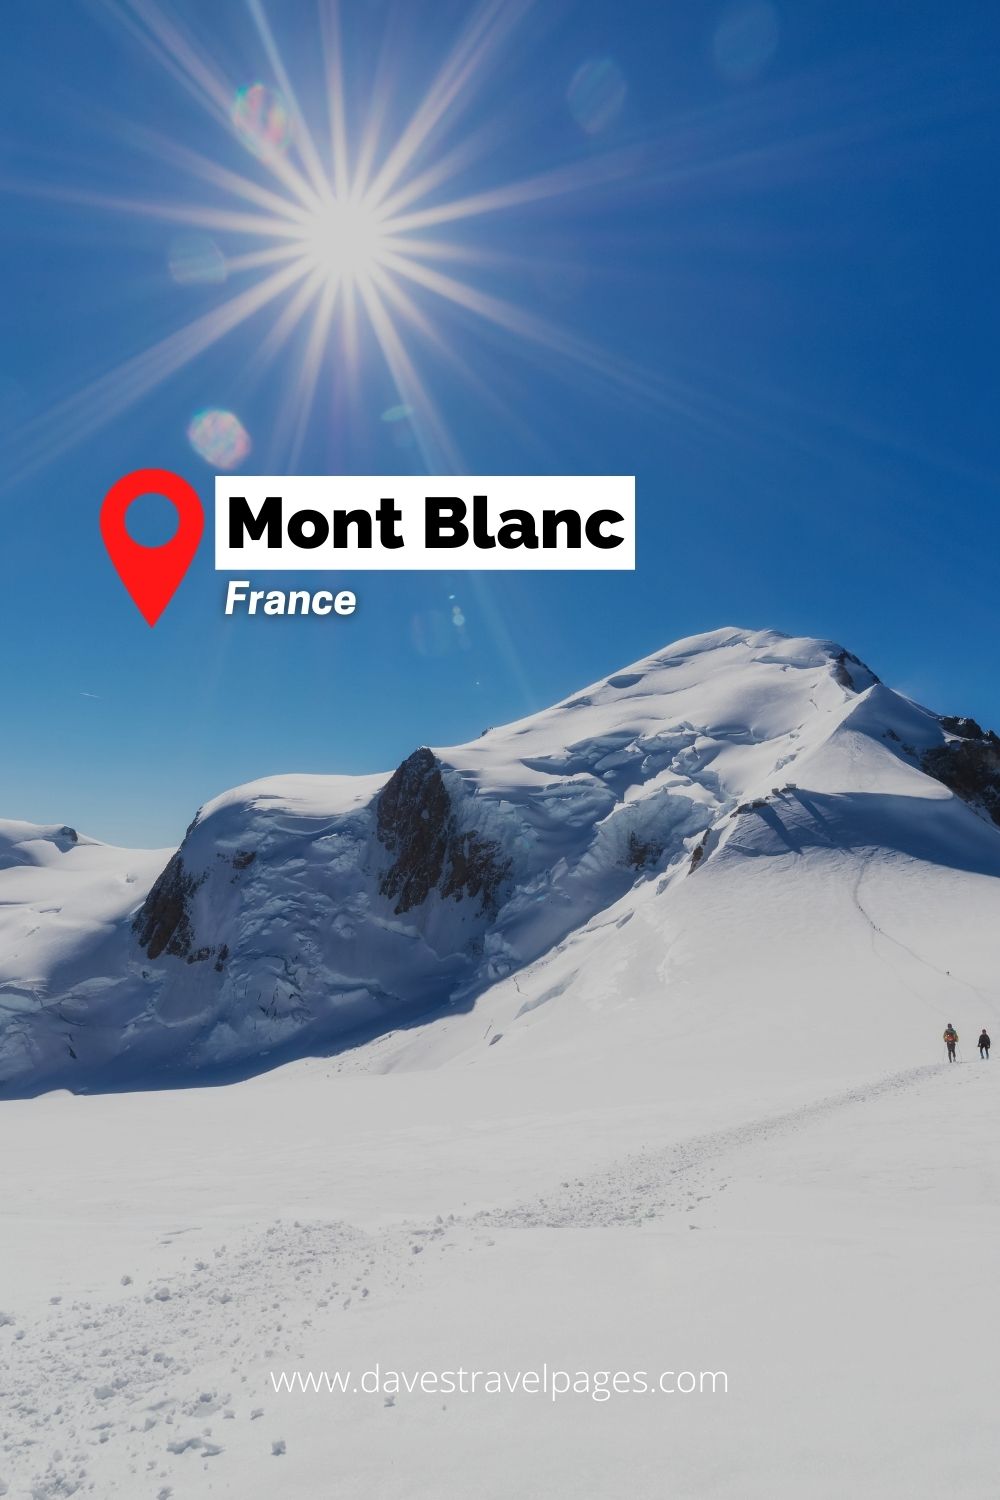 Mont Blanc - France/Italy